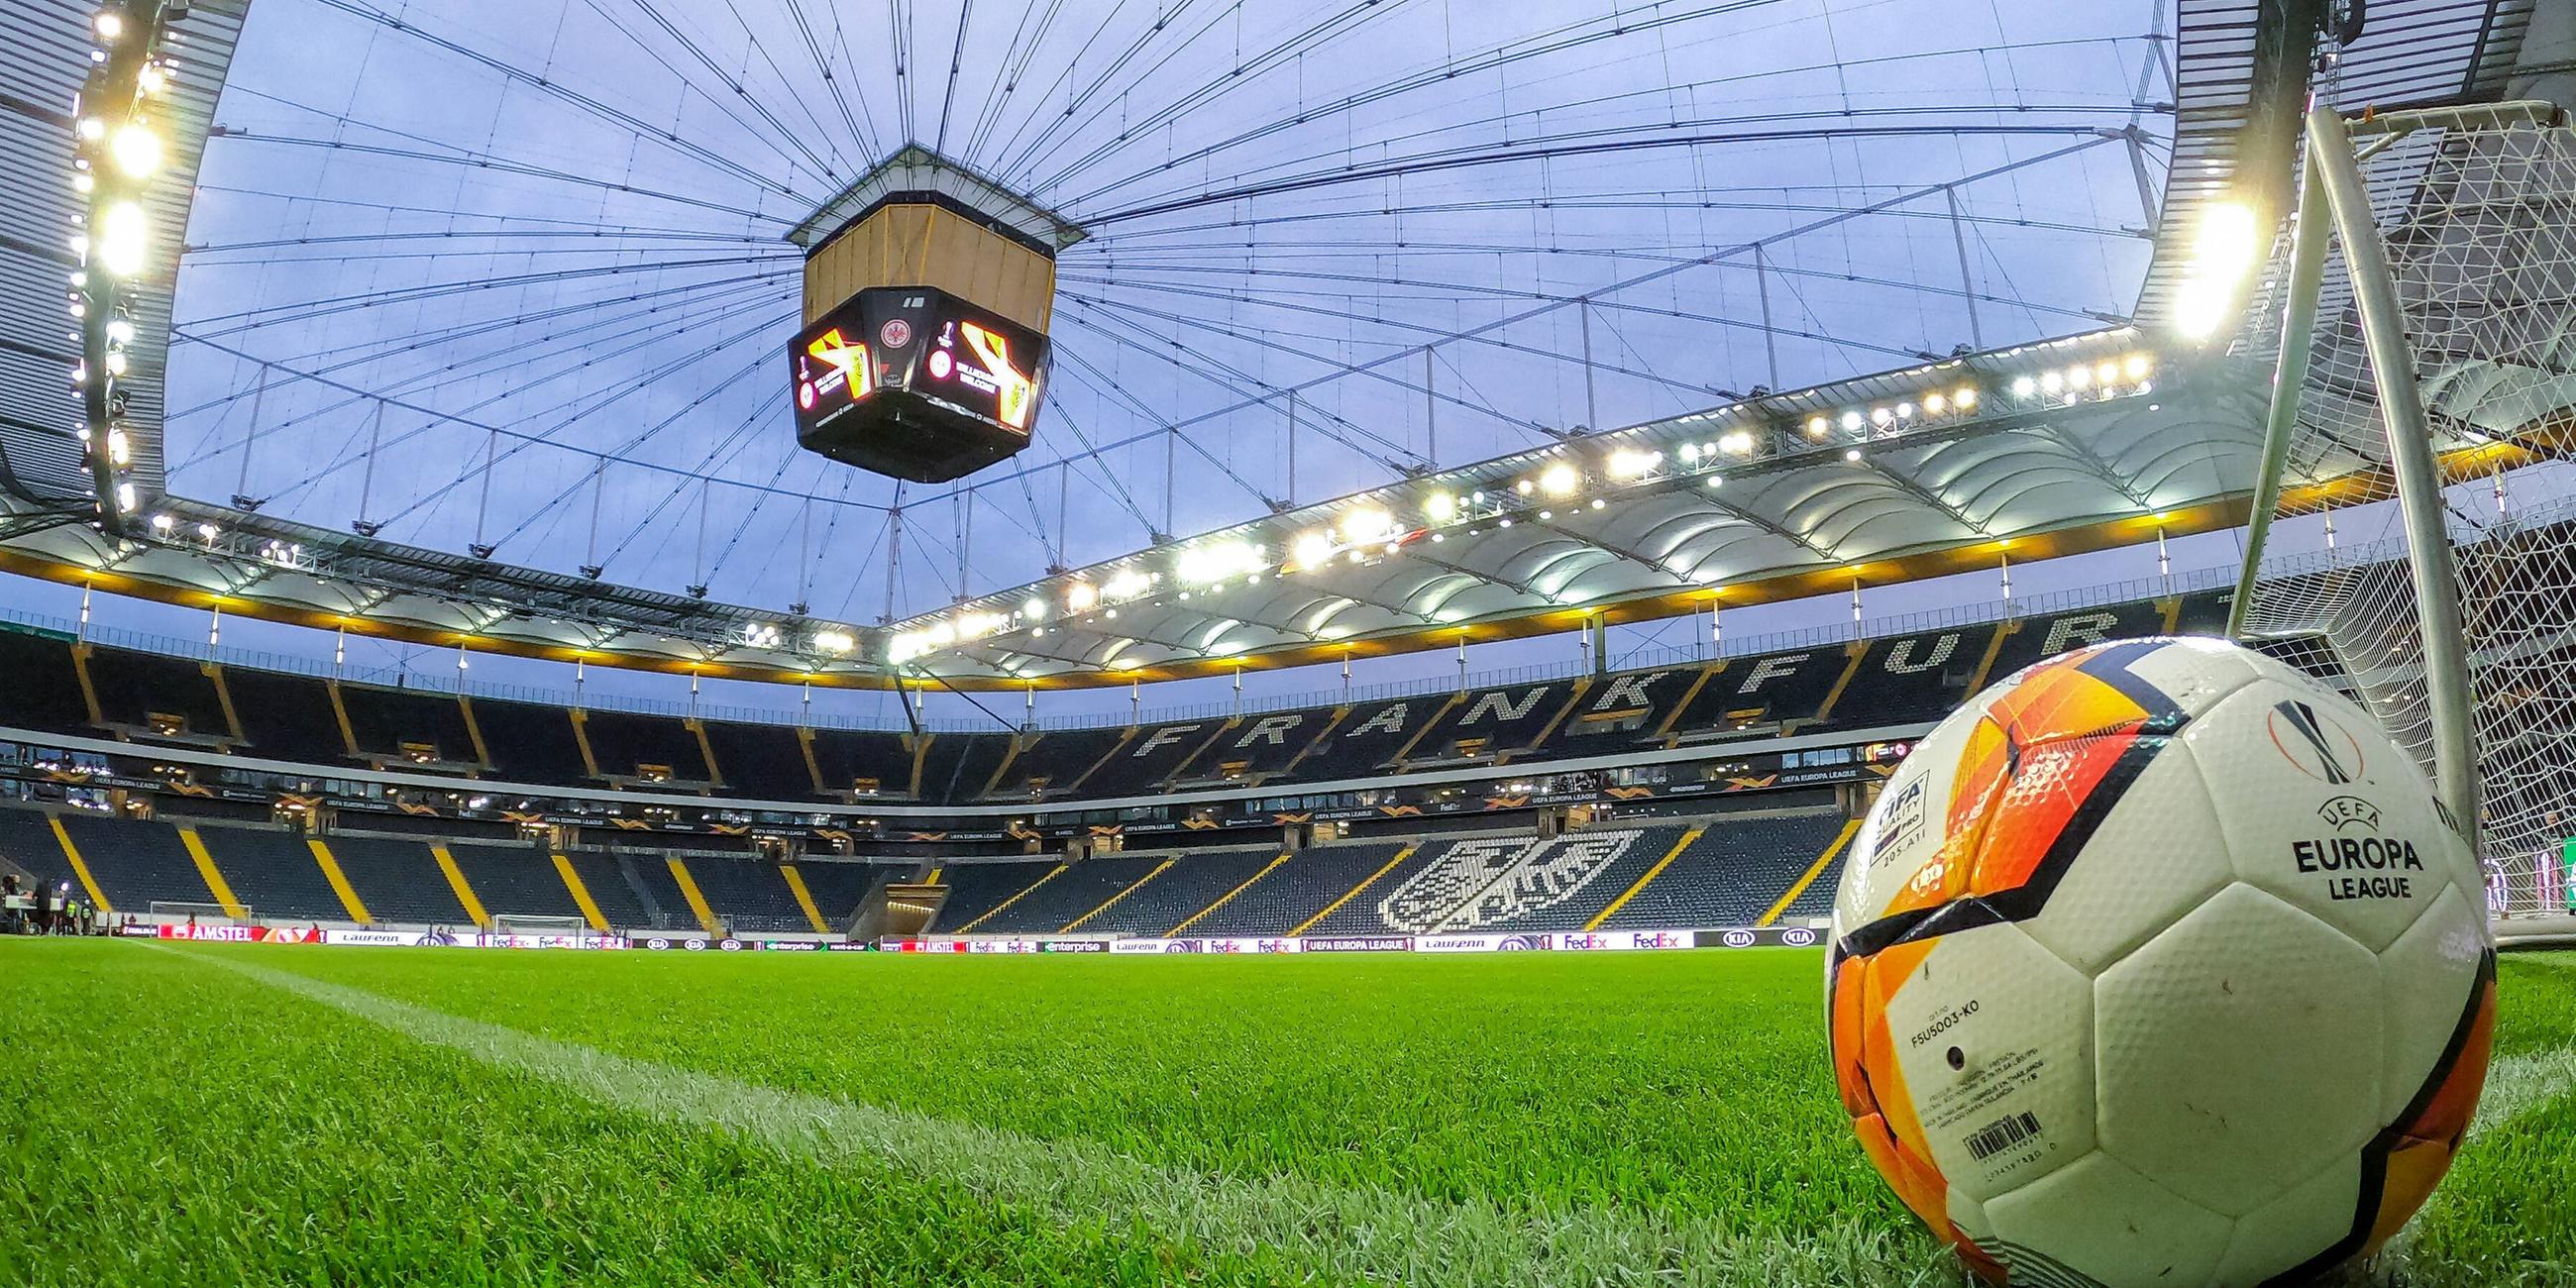 Typical: Commerzbank Arena